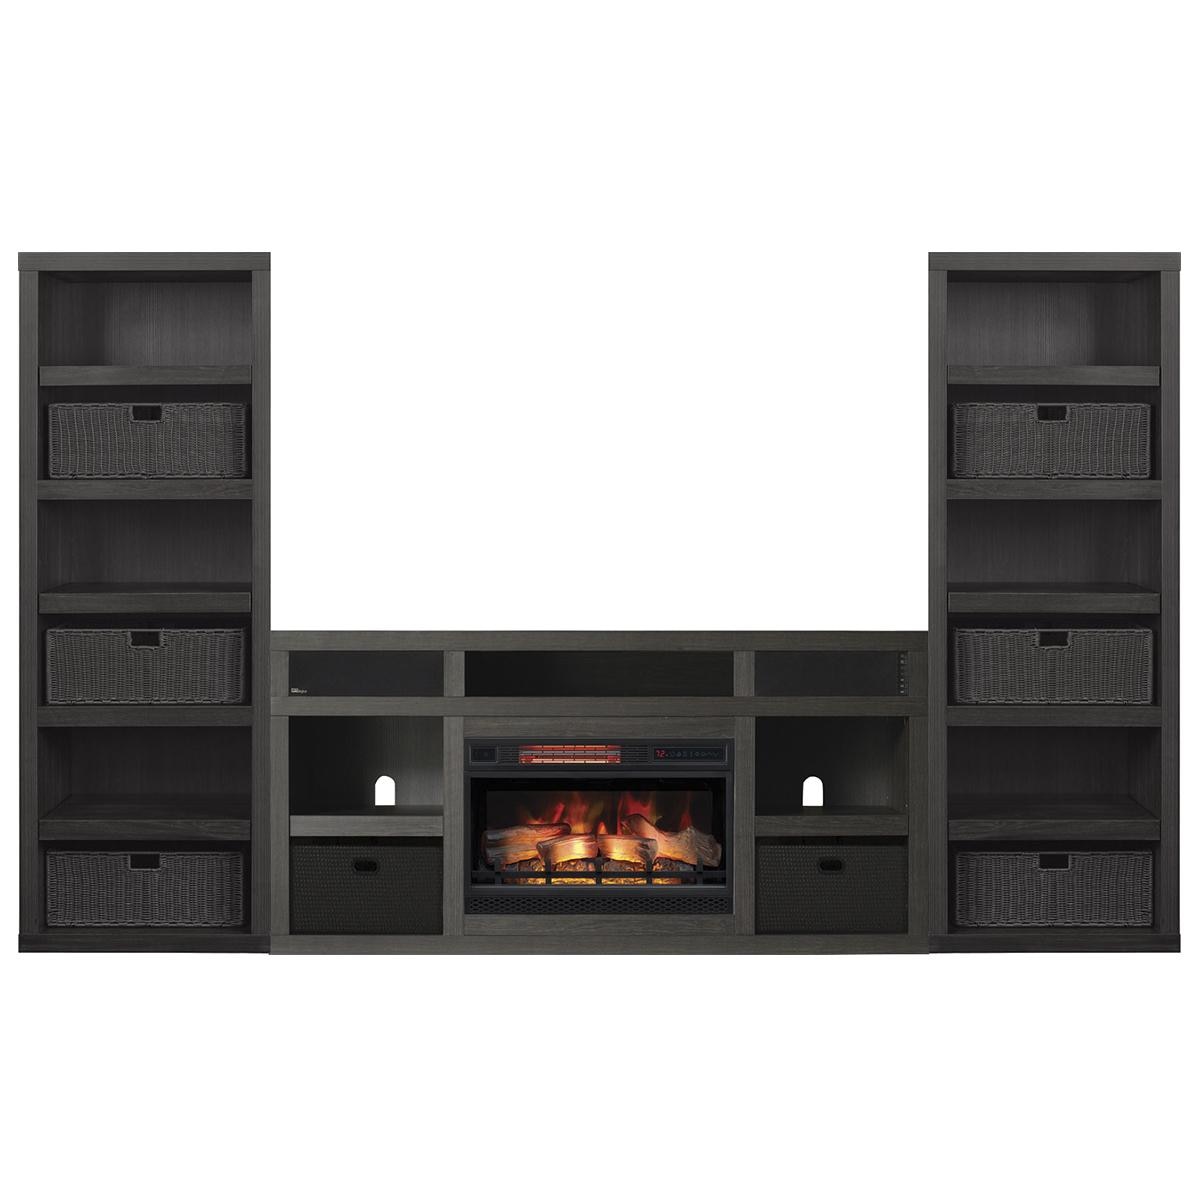 Ceiling Mounted Fireplace Elegant Fabio Flames Greatlin 3 Piece Fireplace Entertainment Wall